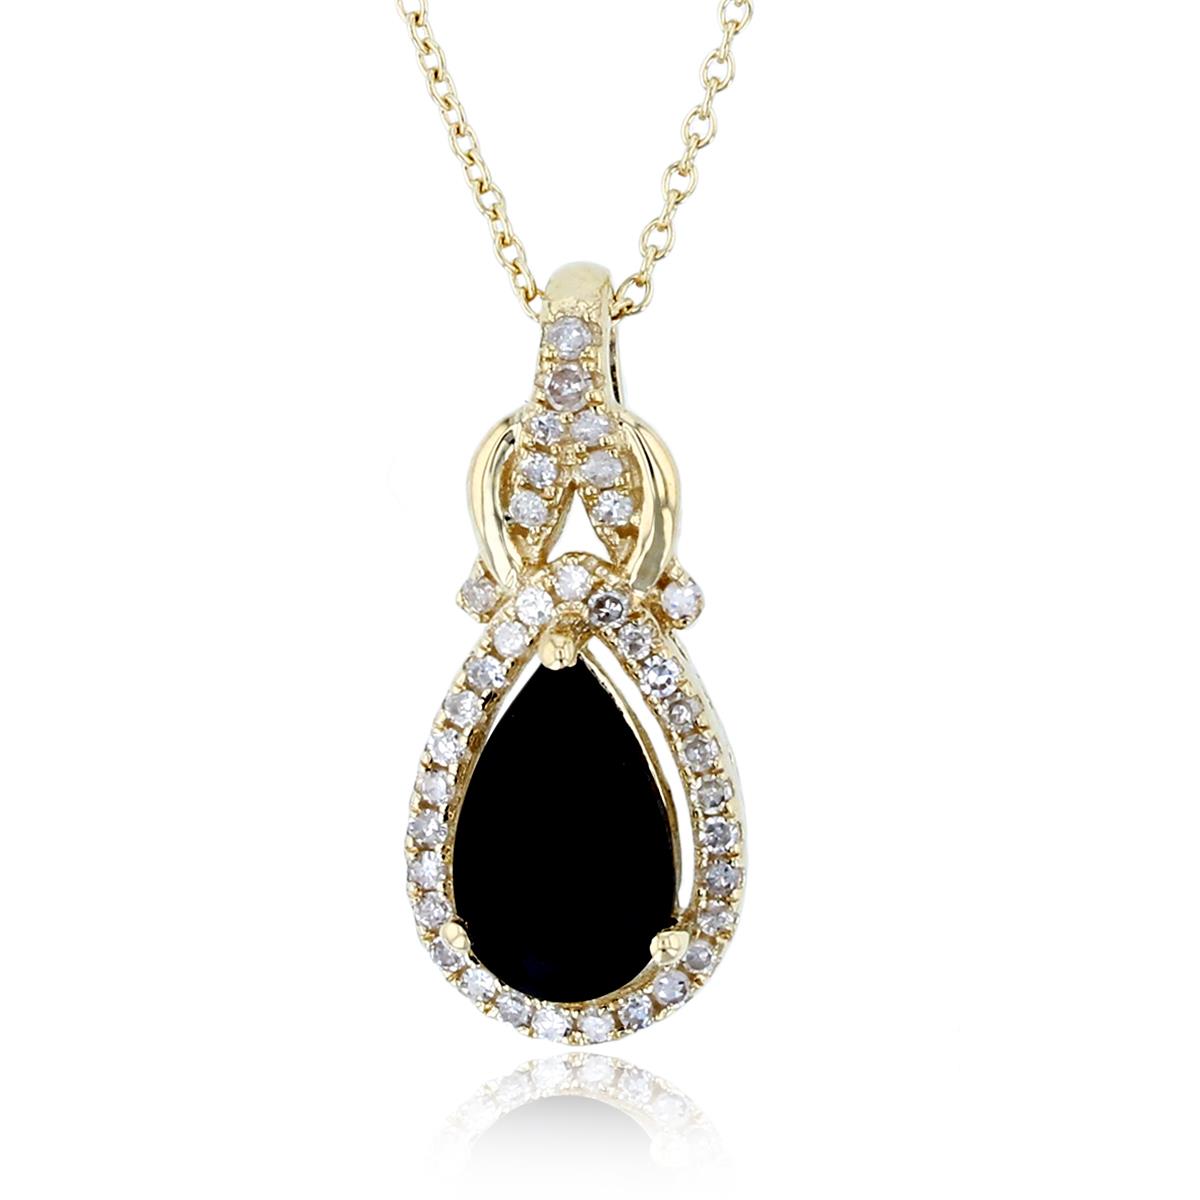 10K Yellow Gold 0.12cttw Rnd Diamonds & 8X5mm PS Onyx Knot Top 18"Necklace